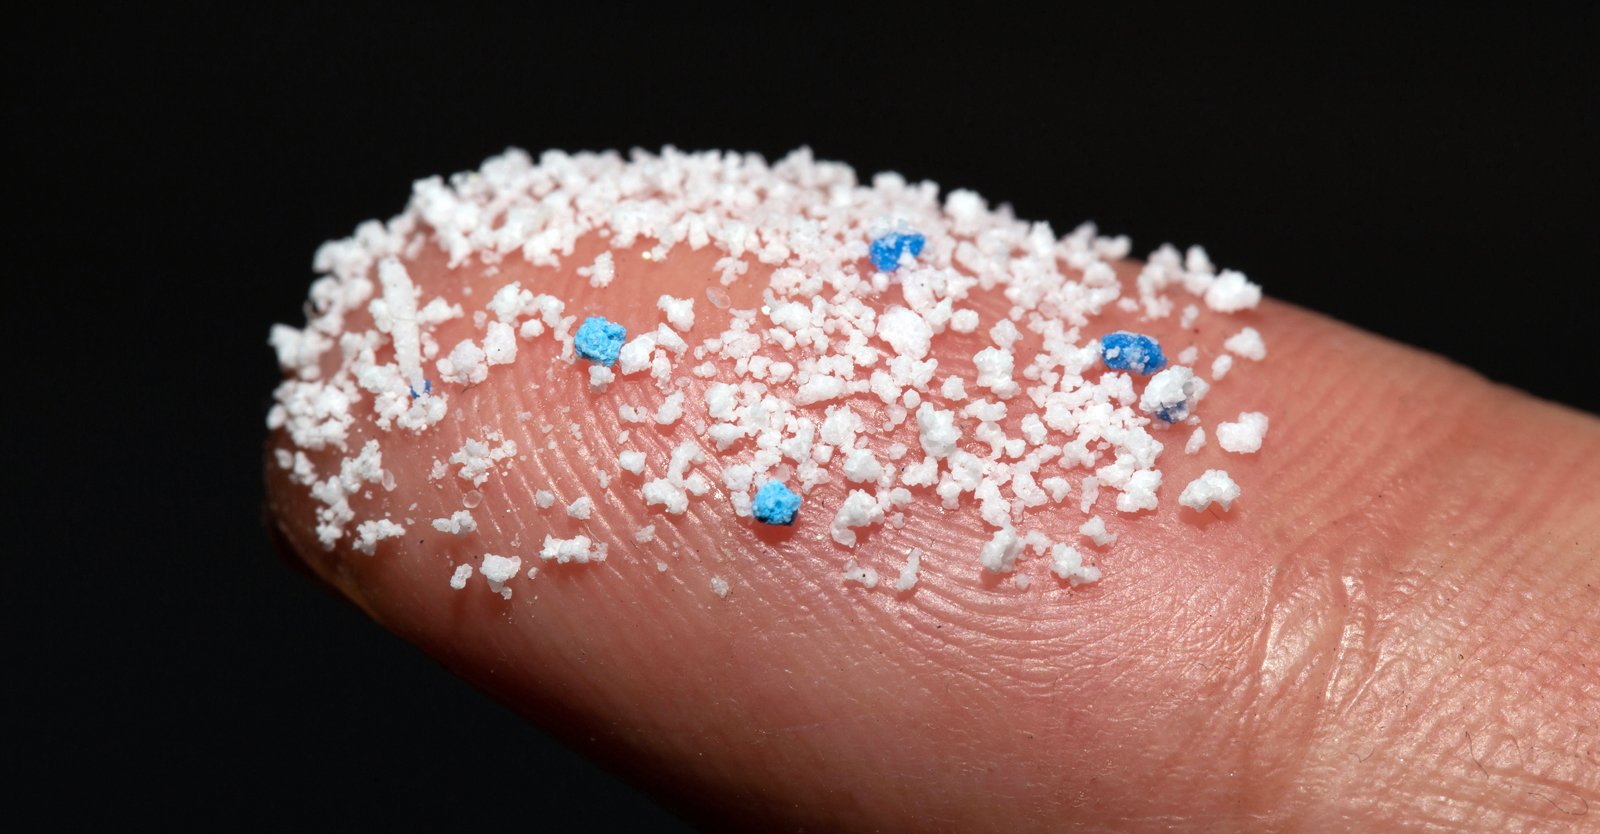 Biodegradable polymers will solve the problem of microplastics